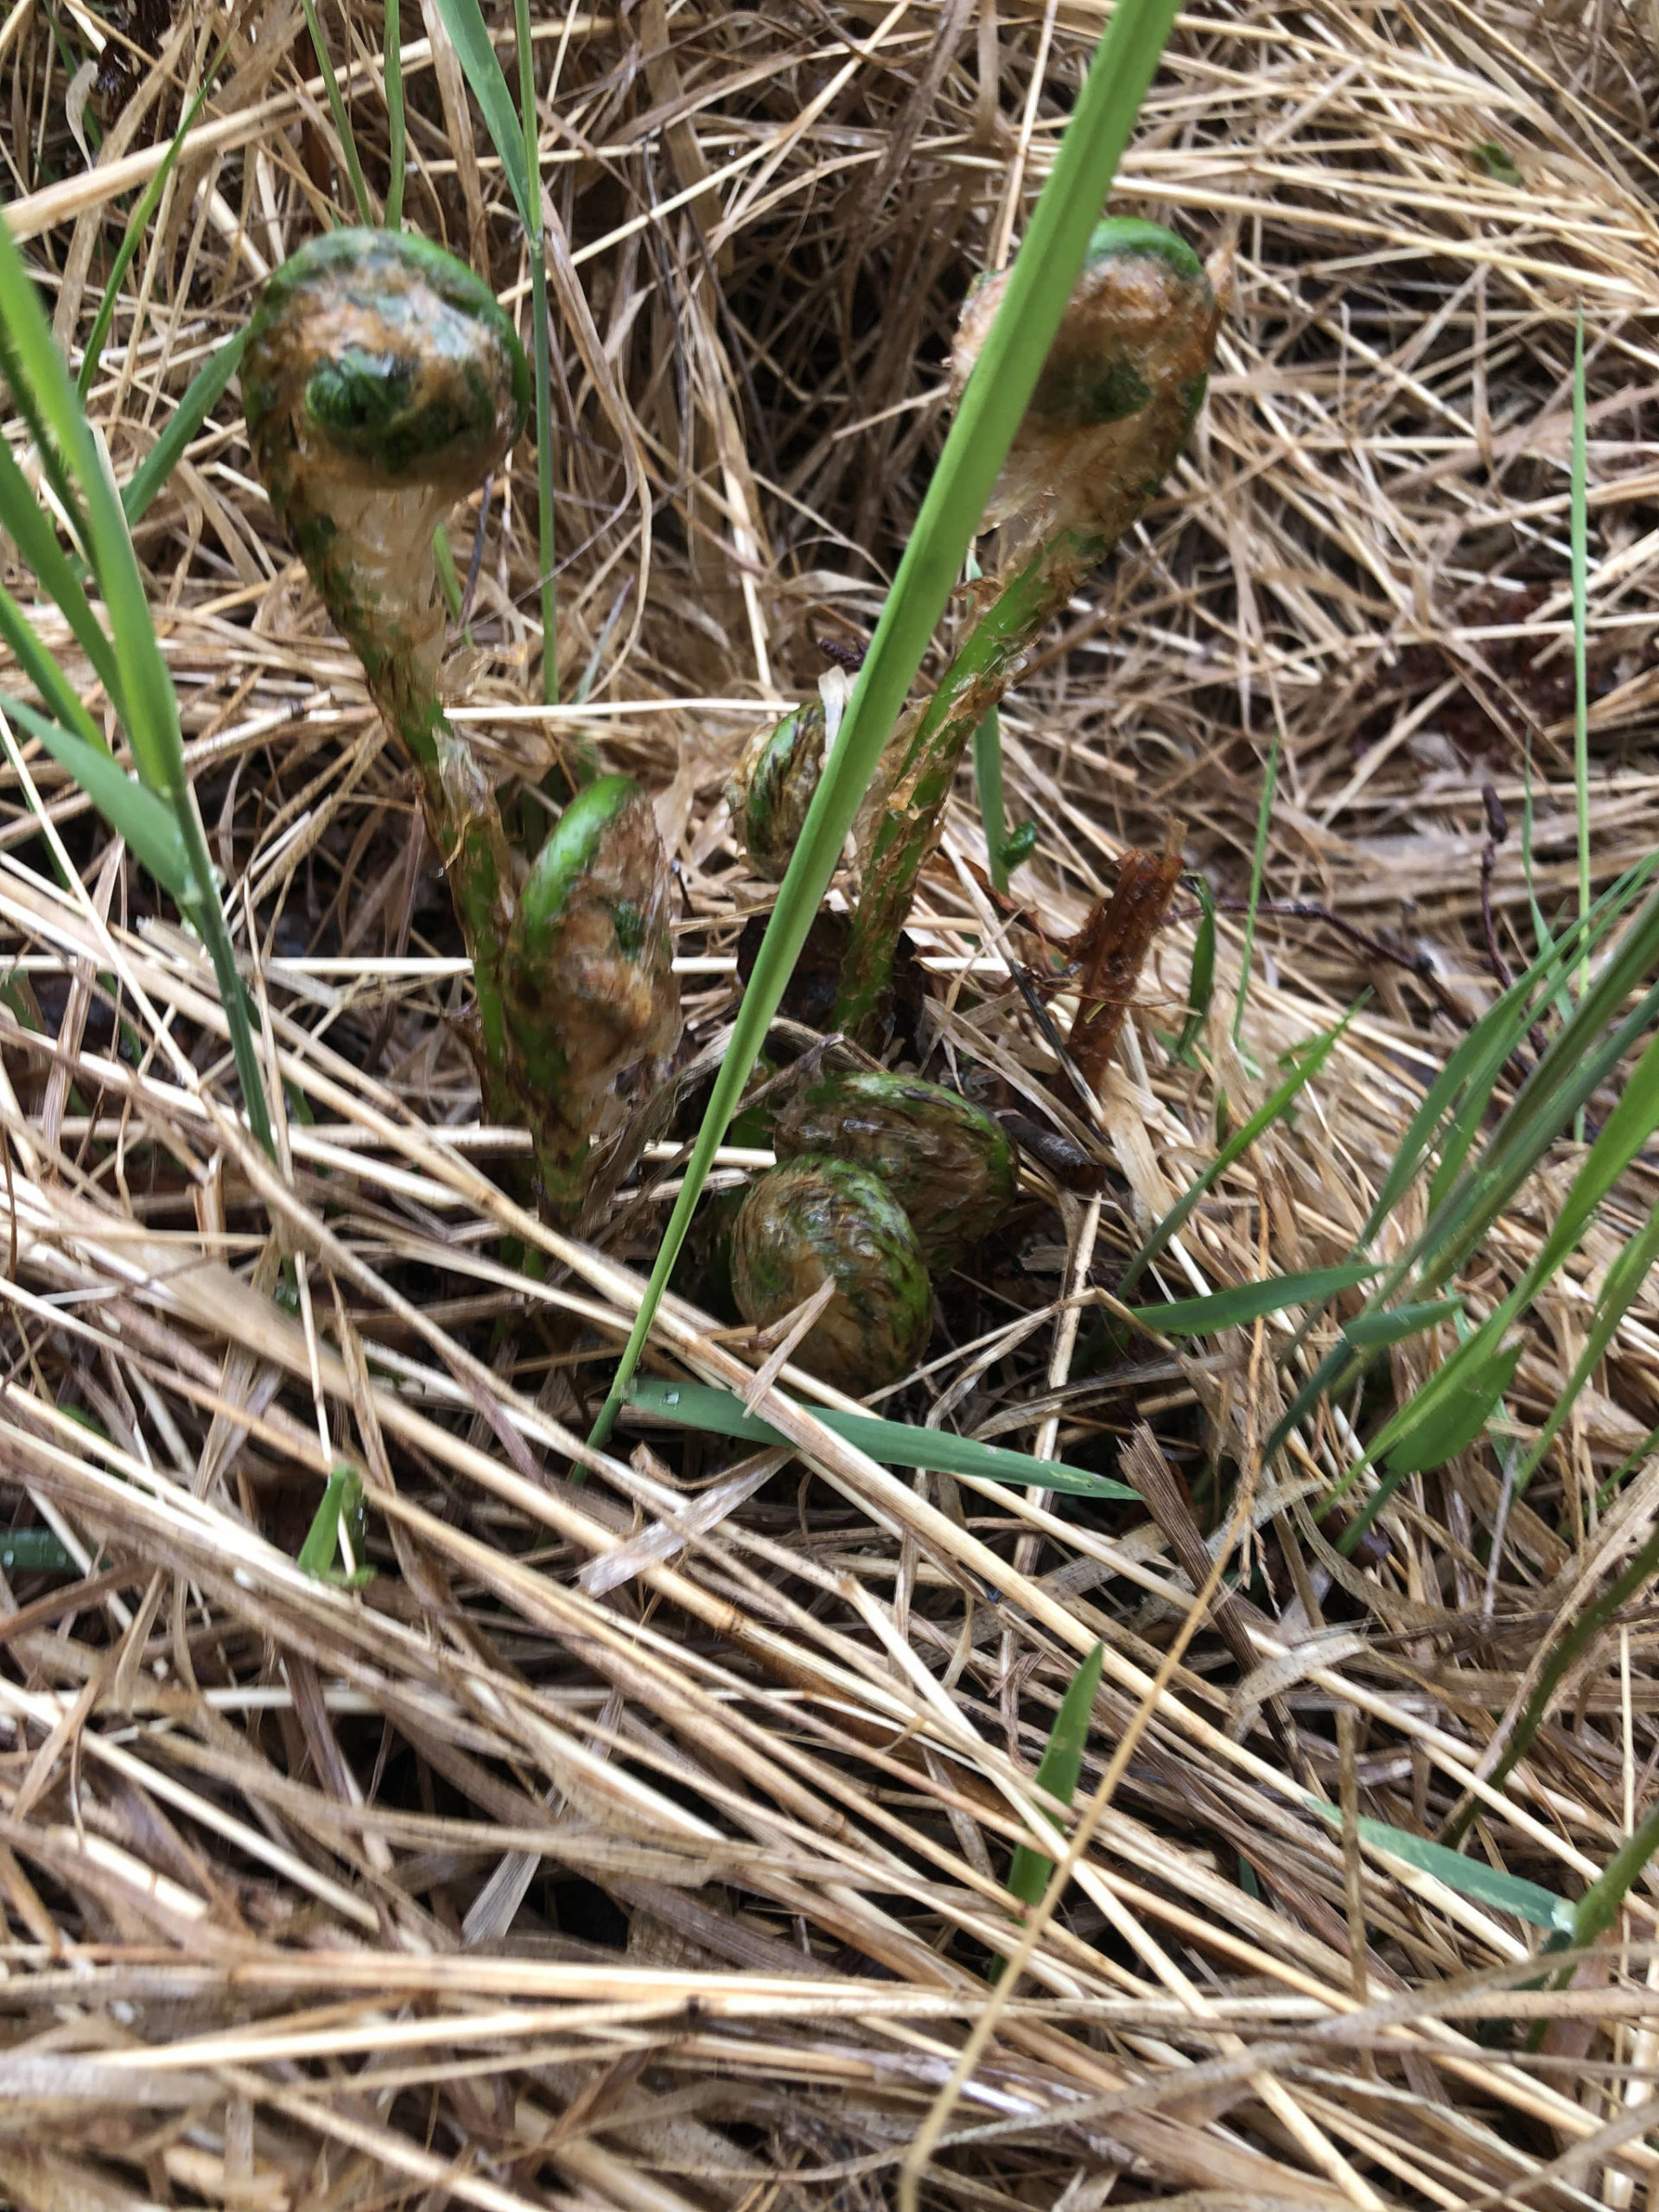 Fiddlehead ferns shooting up from the ground, on May 24 in Anchorage, Alaska. (Photo by Victoria Petersen/Peninsula Clarion)